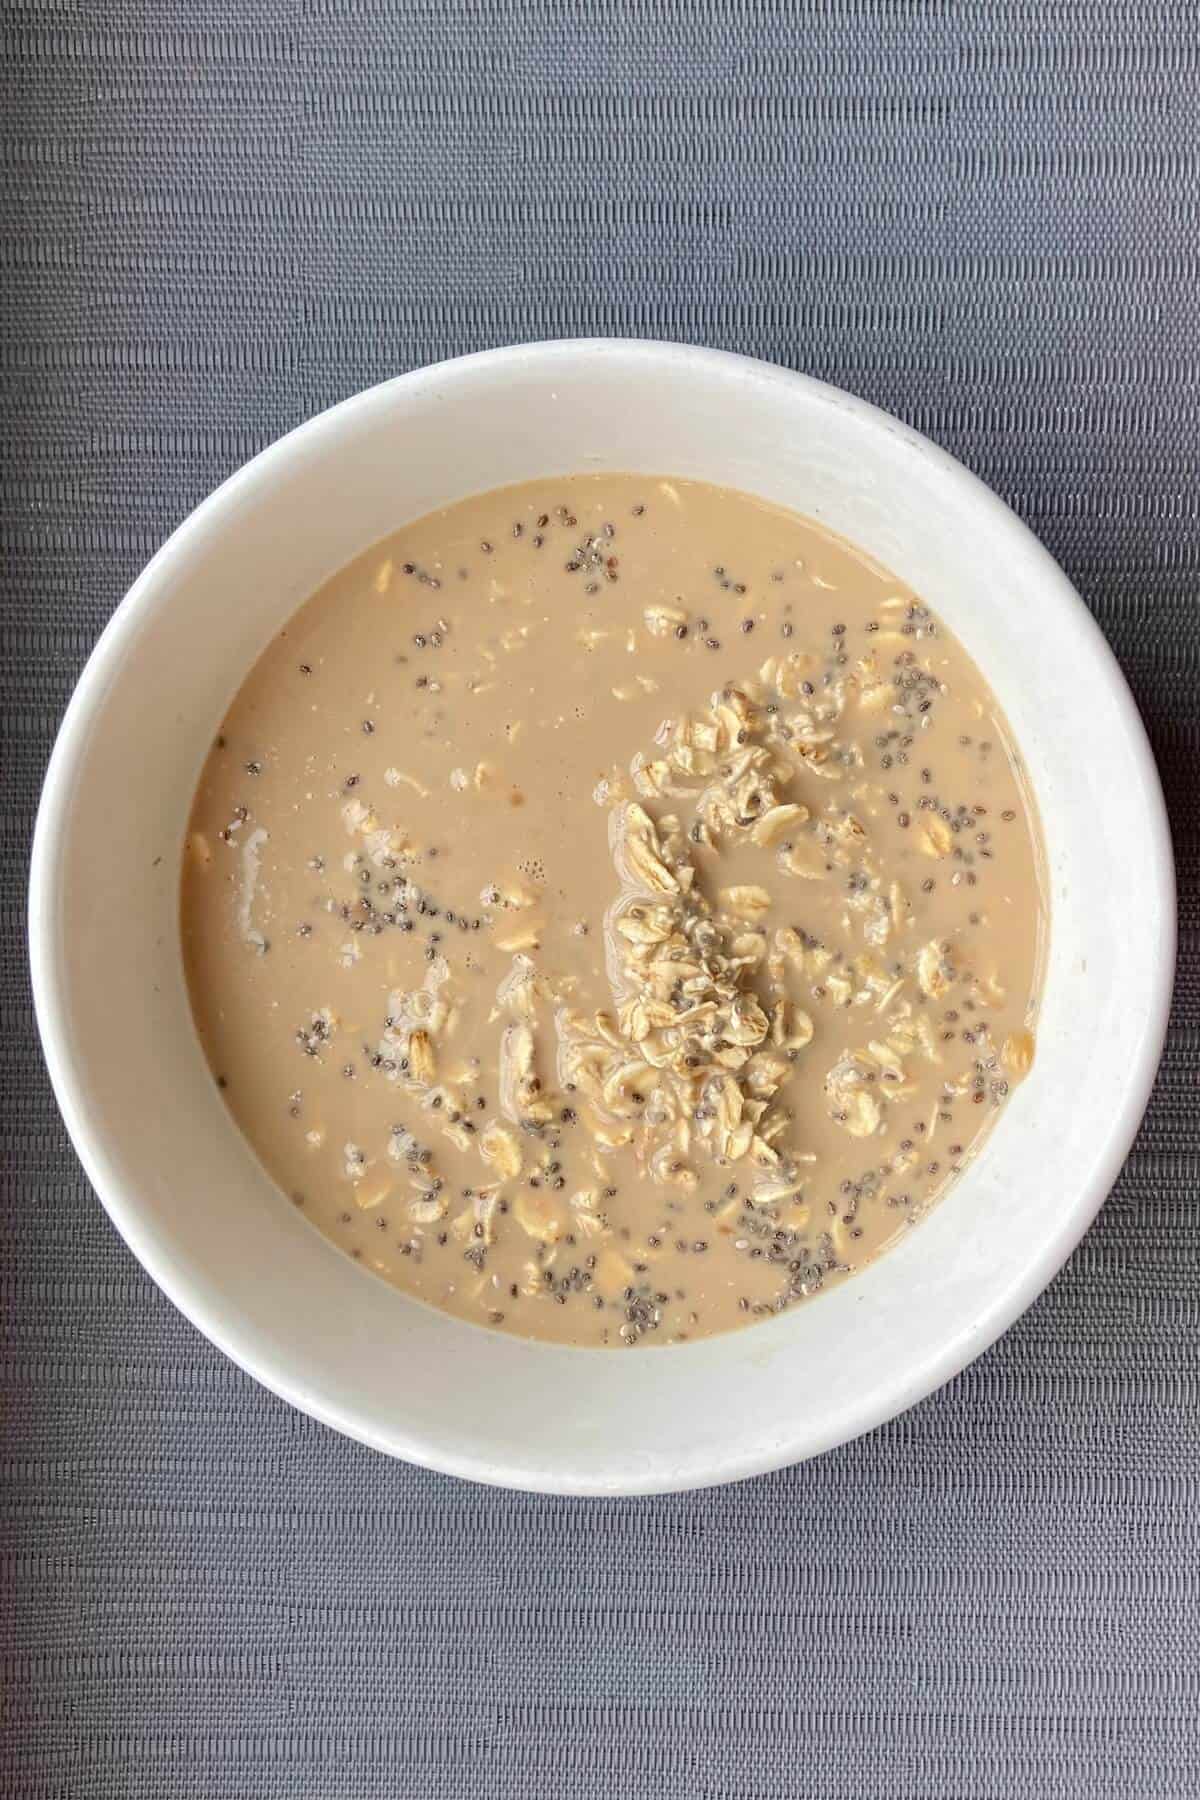 Mixing oats and milk in a bowl.